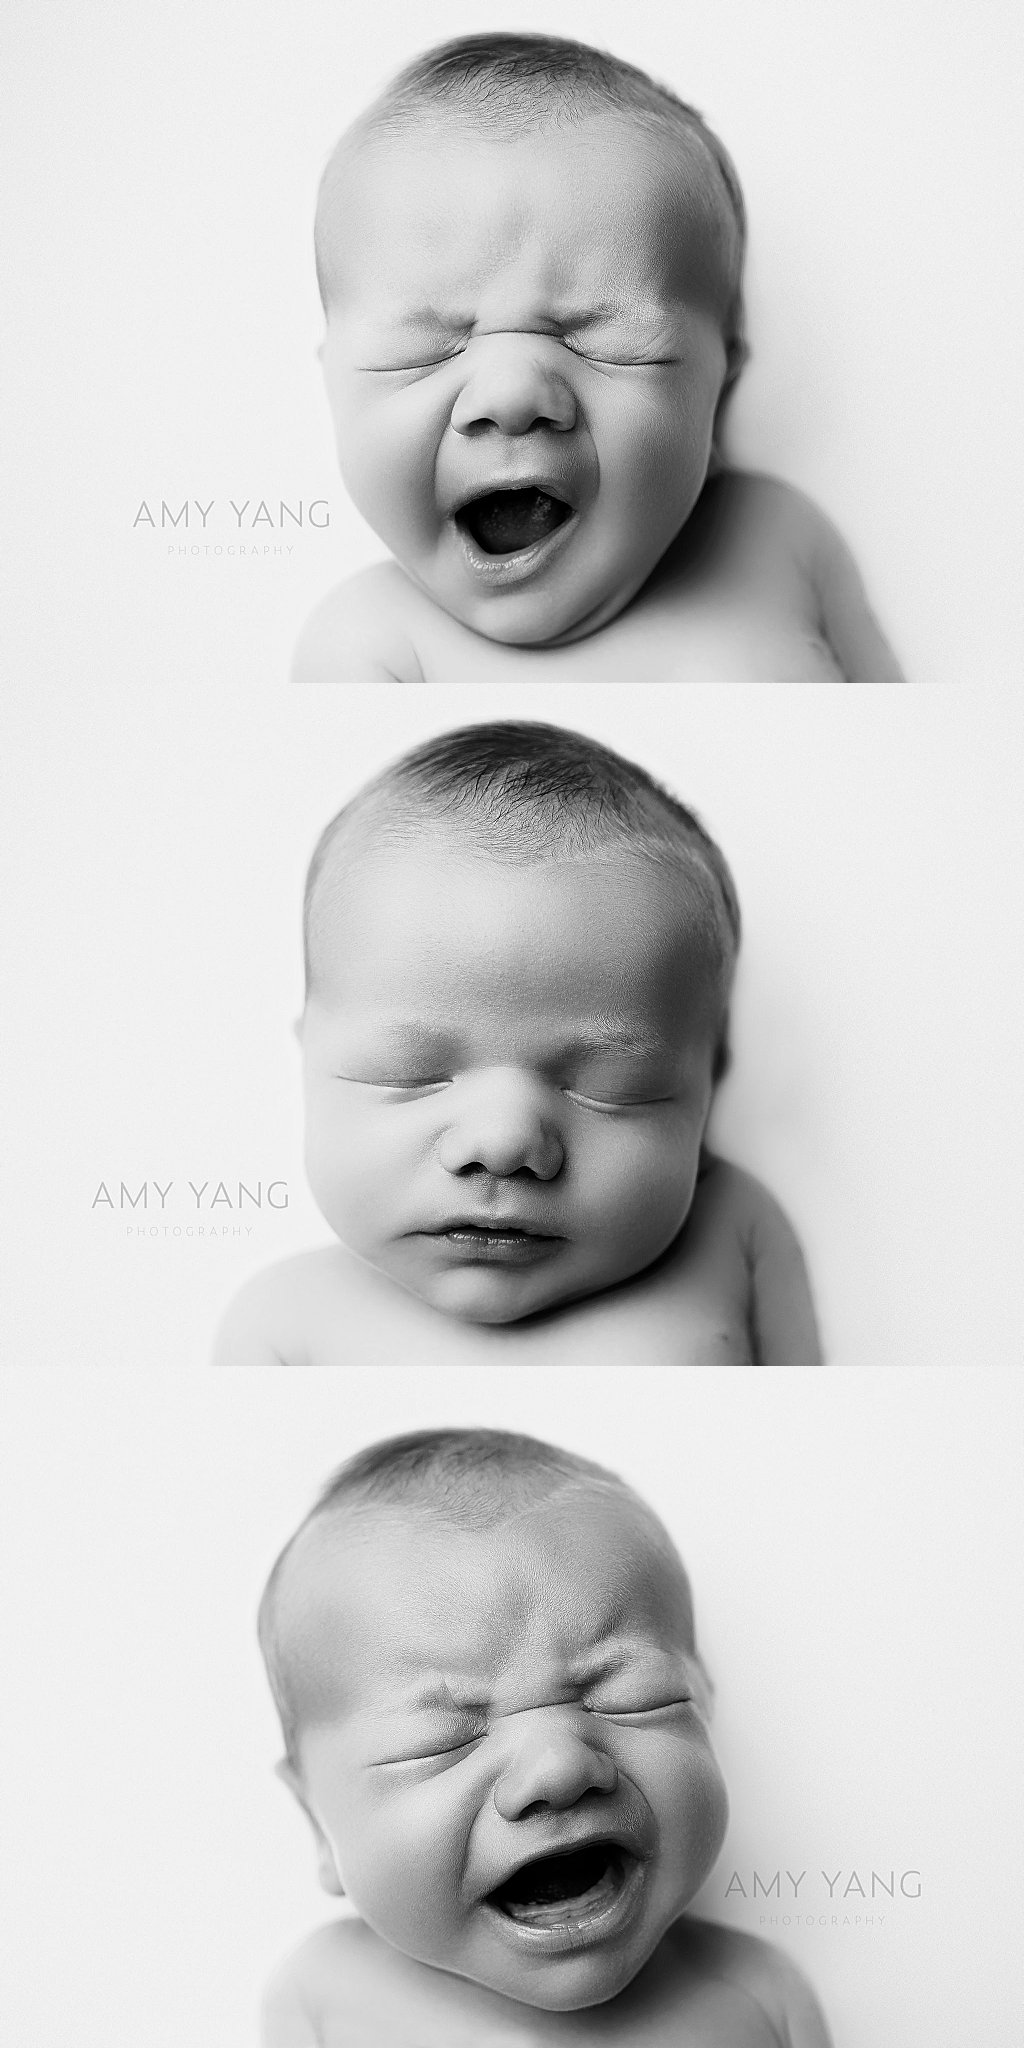 baby makes different faces yawning, sleeping, and crying during studio session experience